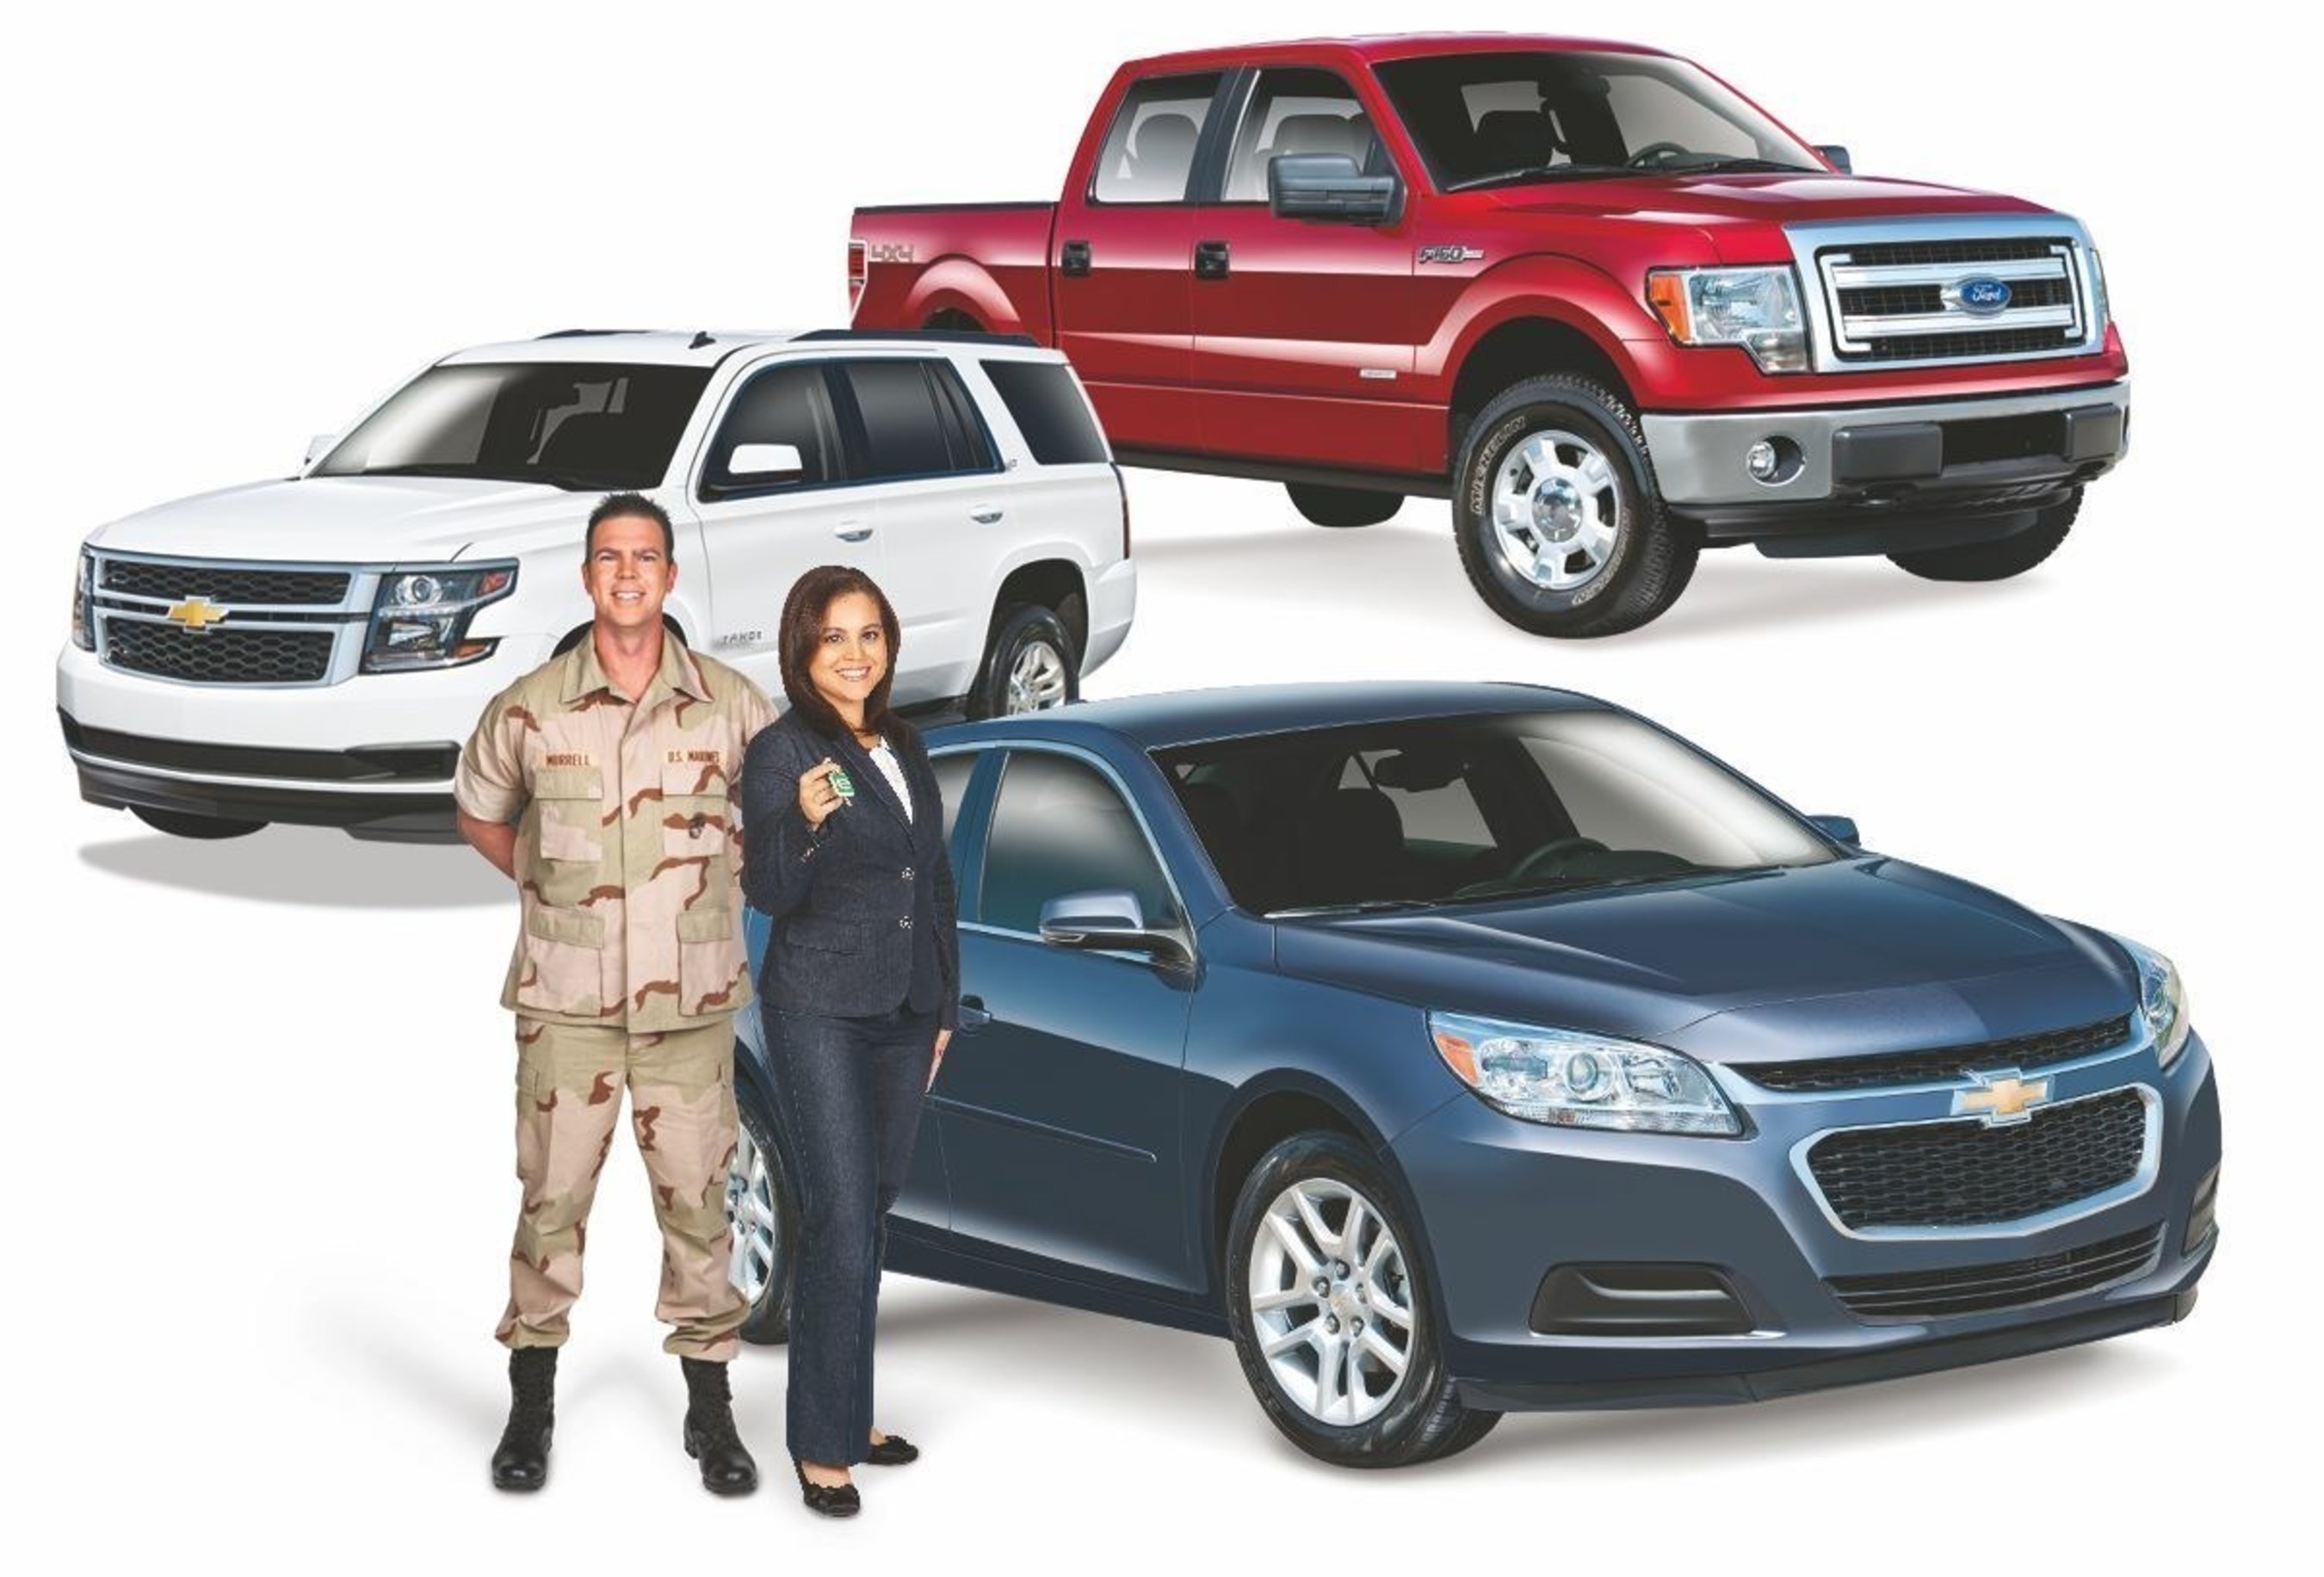 Enterprise Car Sales is providing a special car maintenance package to active military and veterans during the month of November.